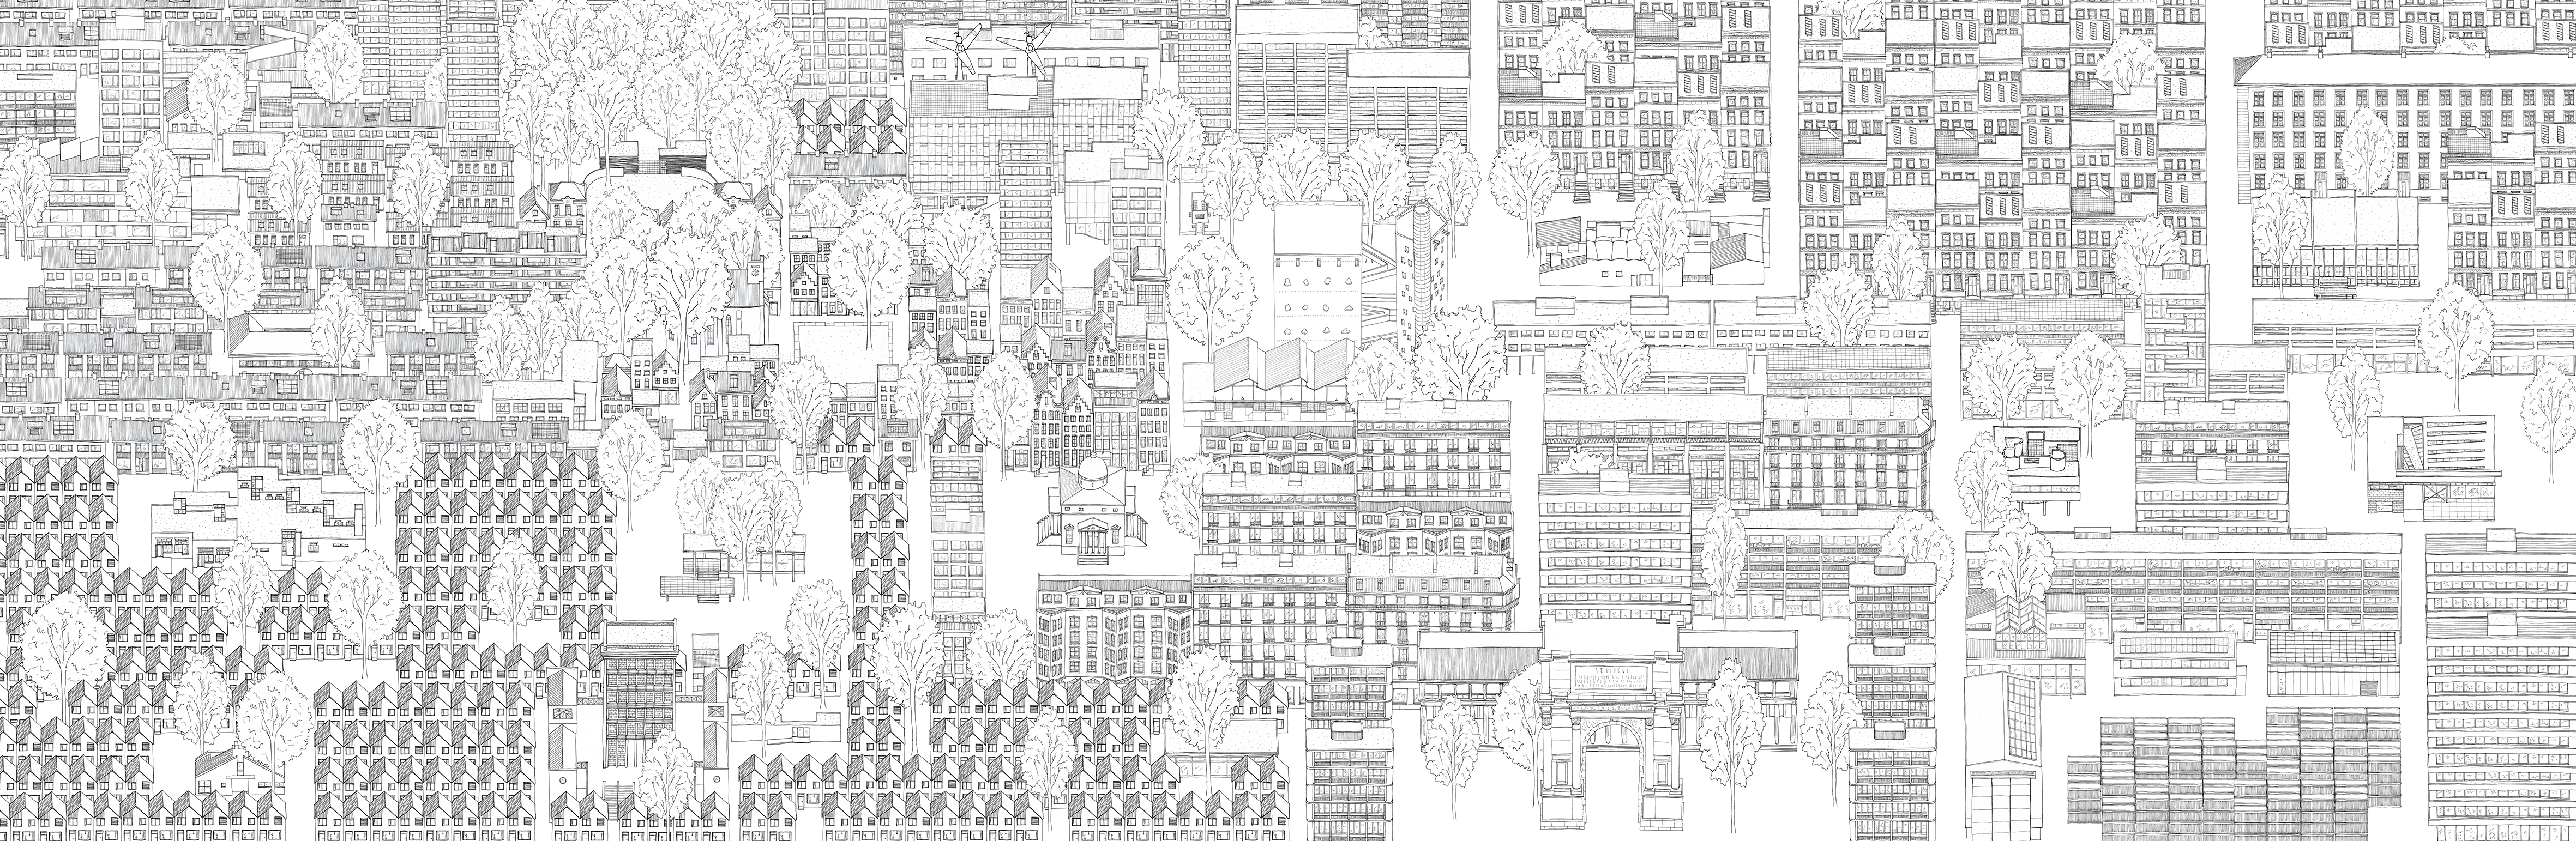 The background of this site is a black-and-white hand drawing. It consist of multiple buildings, public spaces, greenery, suggesting a city.